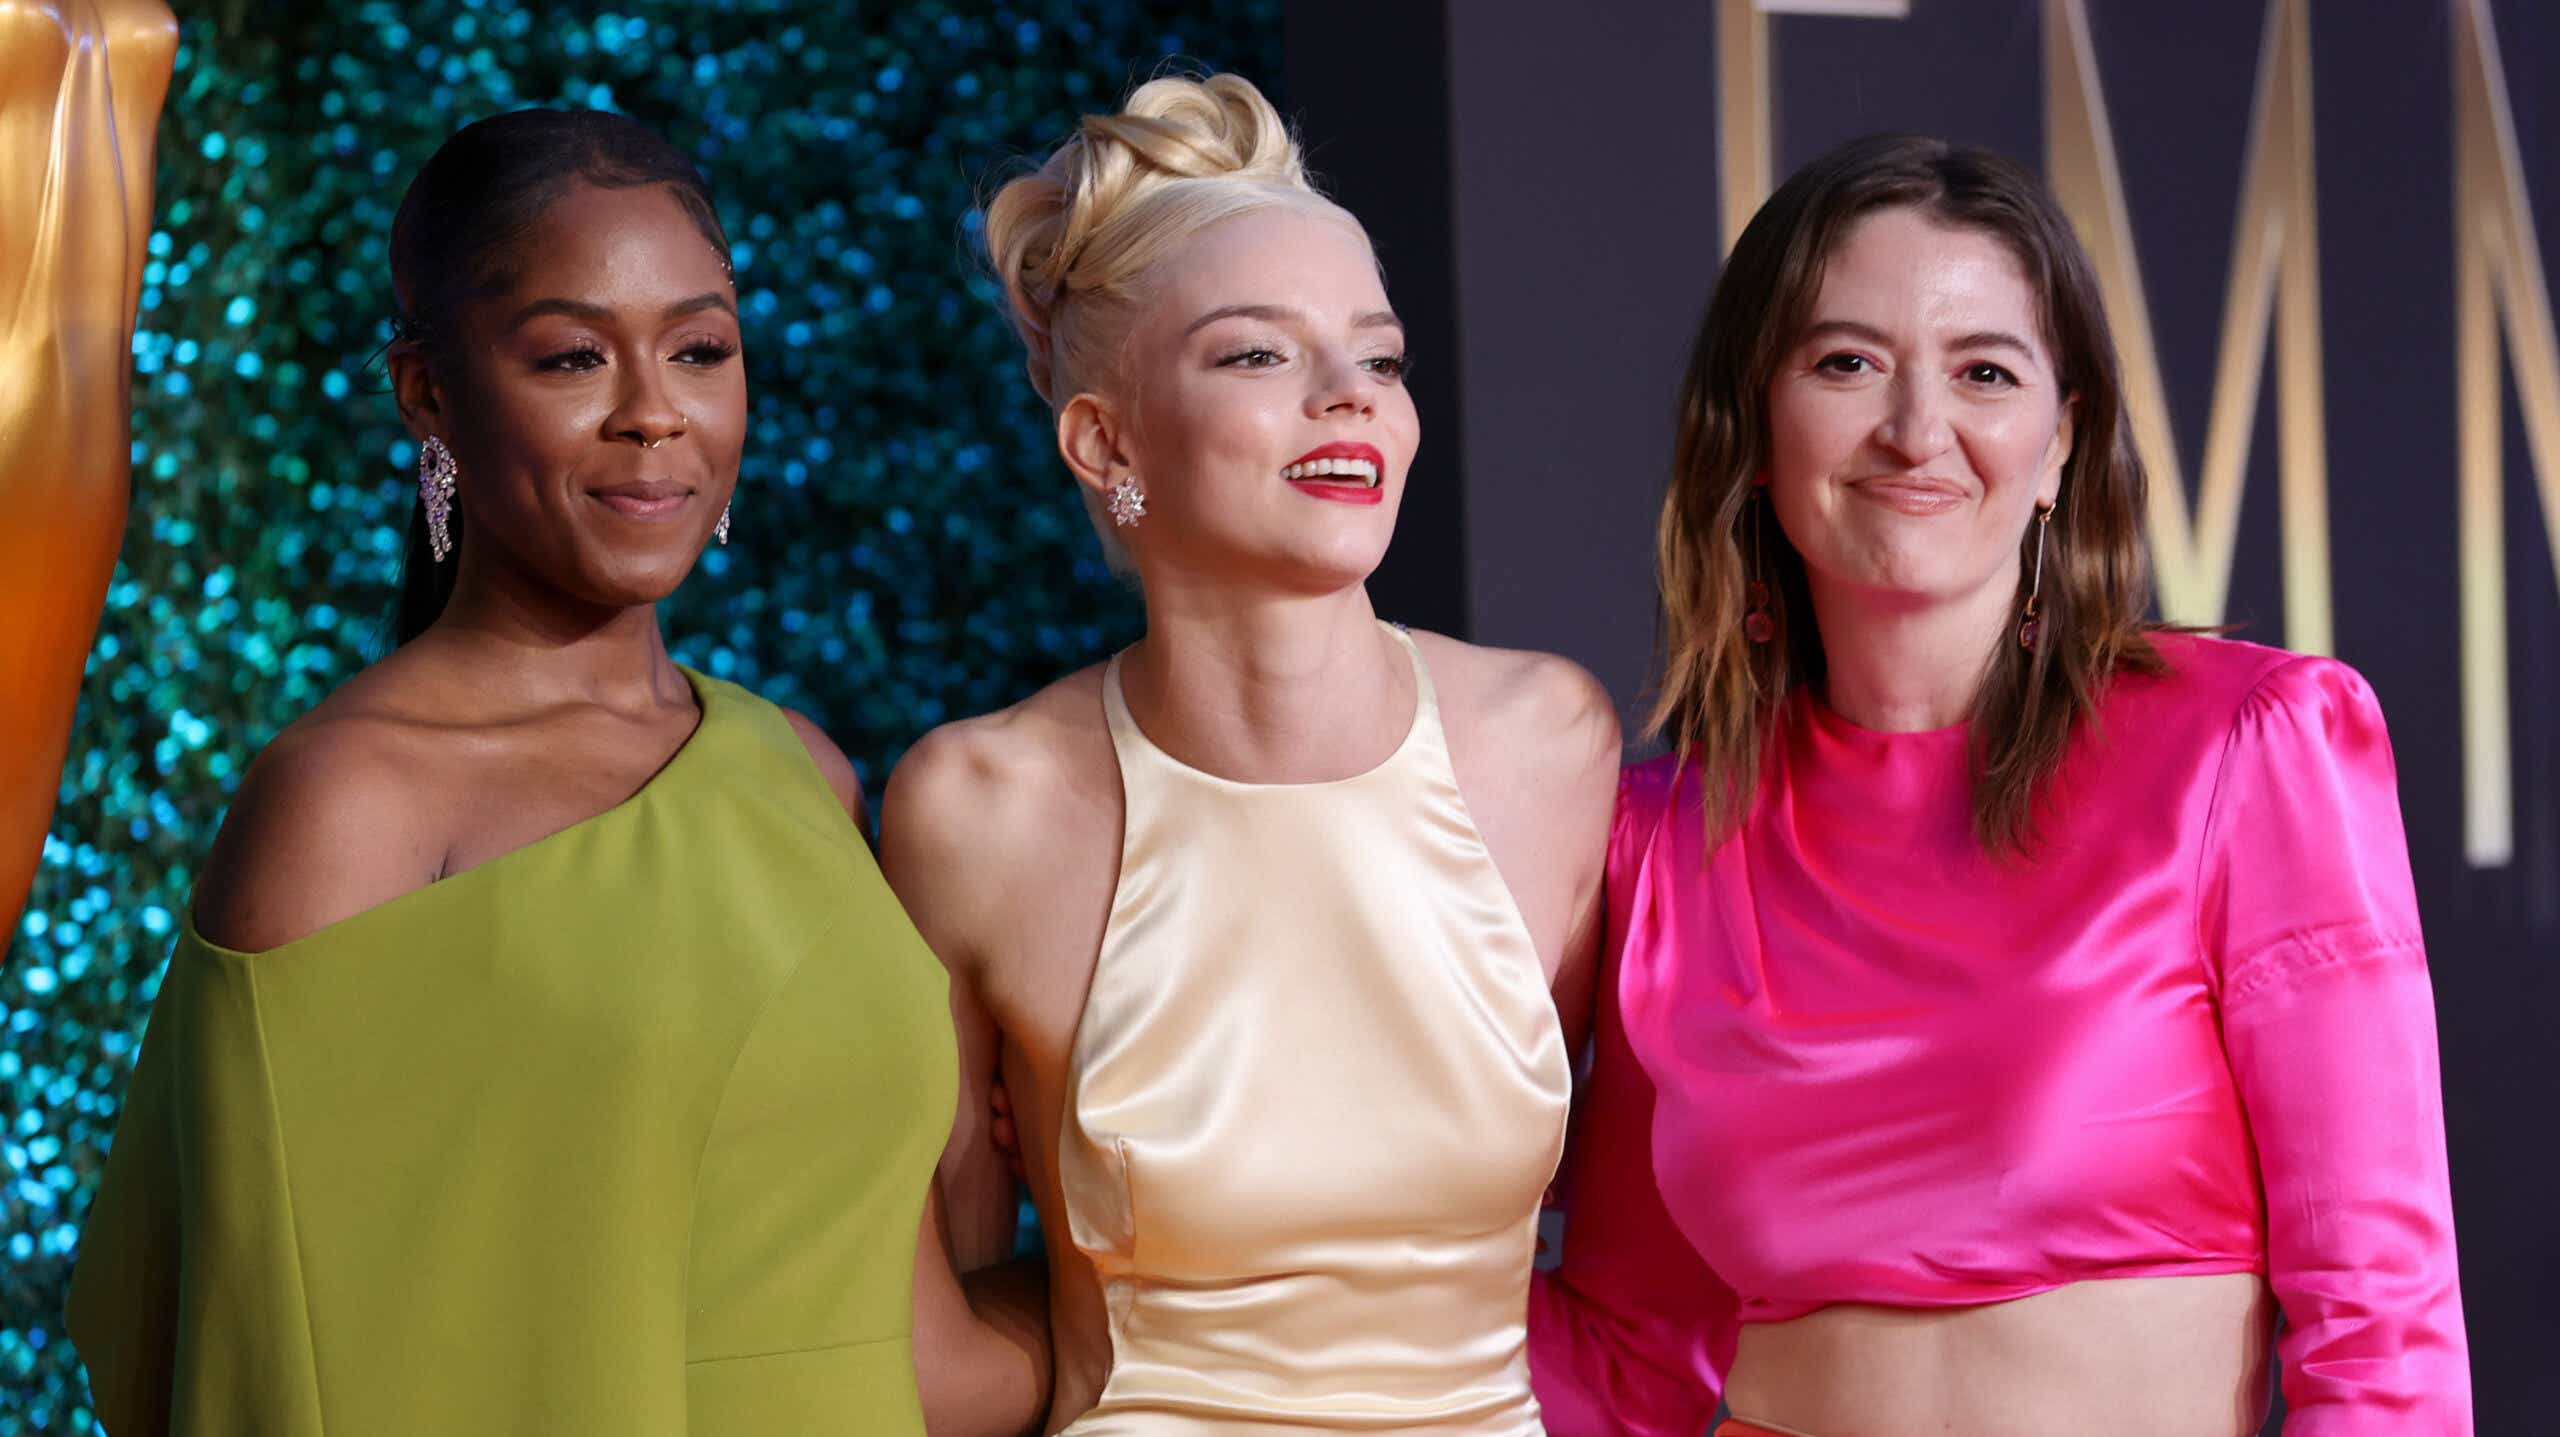 73rd Annual Emmy Awards taking place at LA Live Moses Ingram, Anya Taylor'Joy, and Marielle Heller